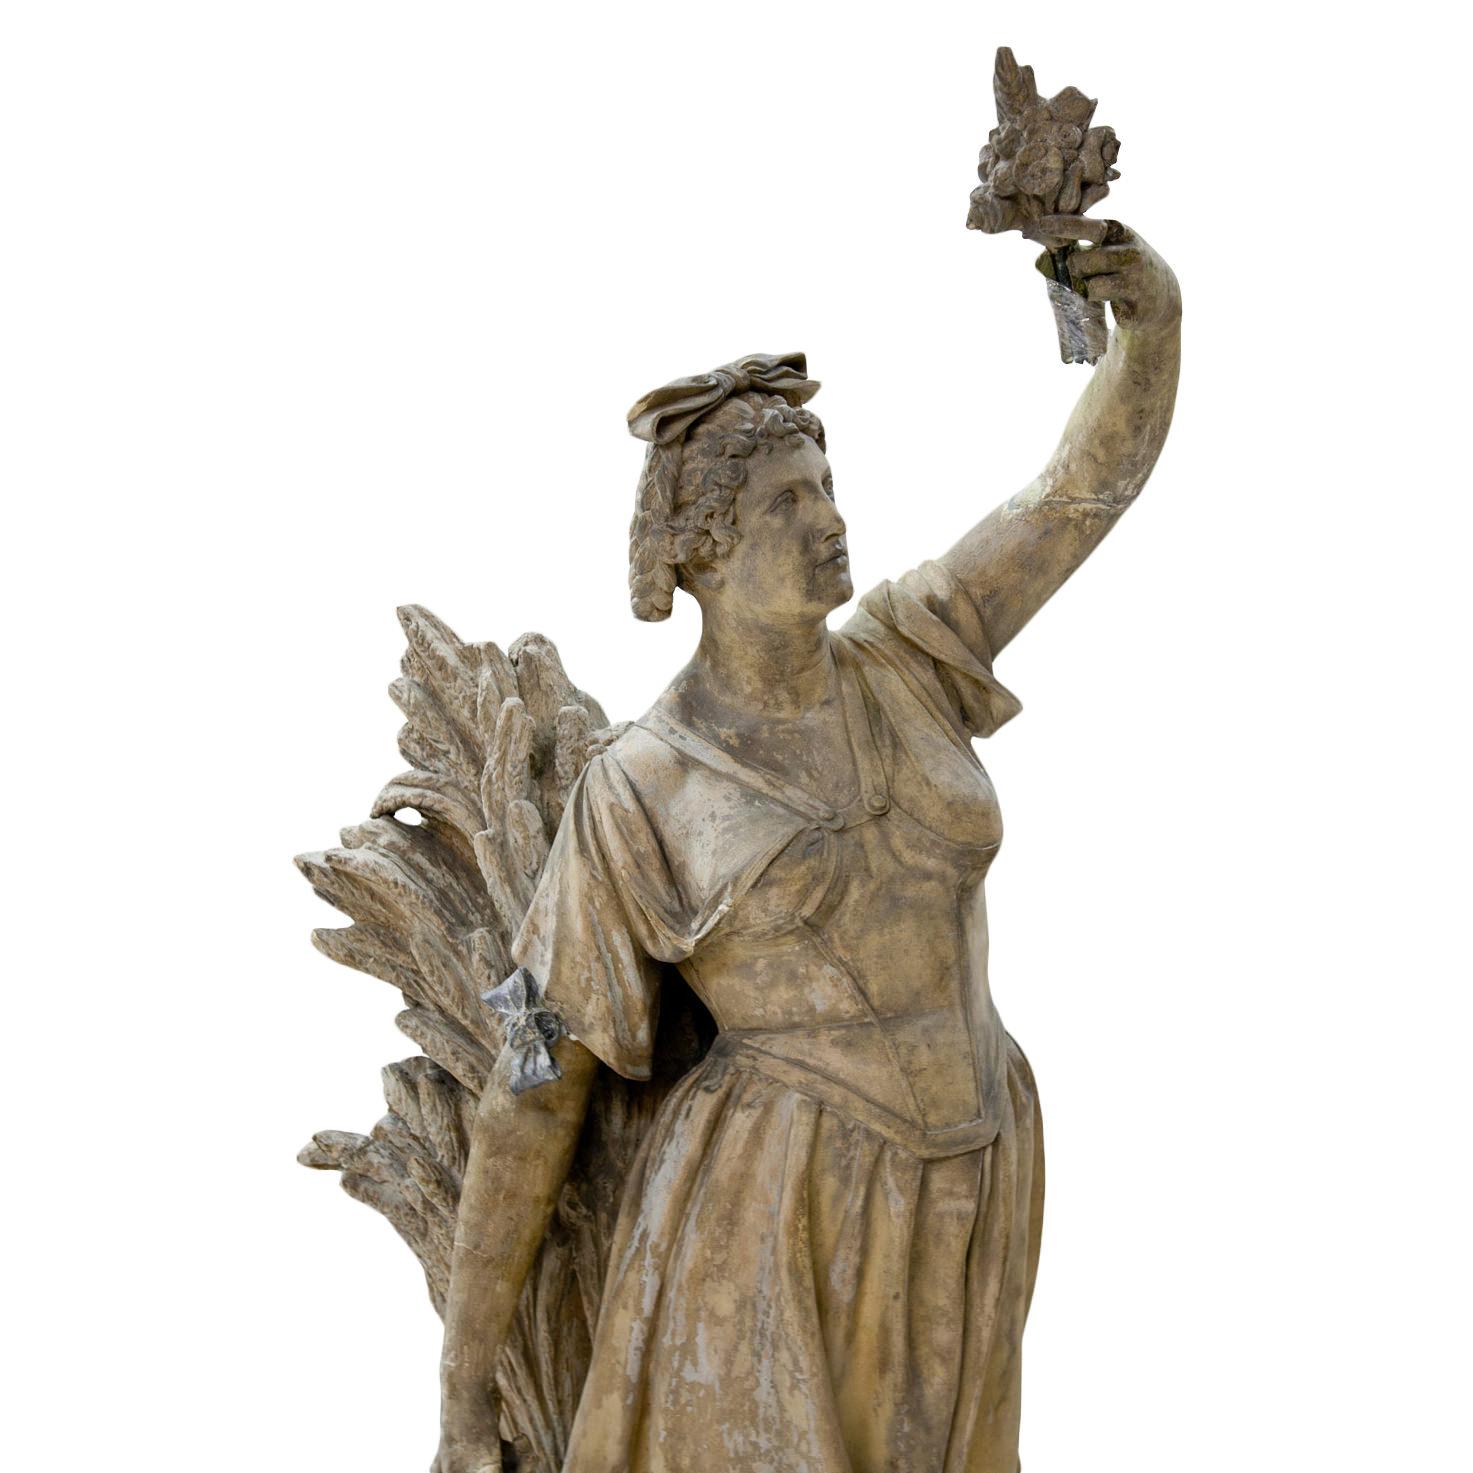 Life-sized terracotta sculpture of Ceres / Demeter, the Goddess of Harvest and Fertility. She holds a small boquet of flowers in her hand and stands in front of a large bundle of grains.